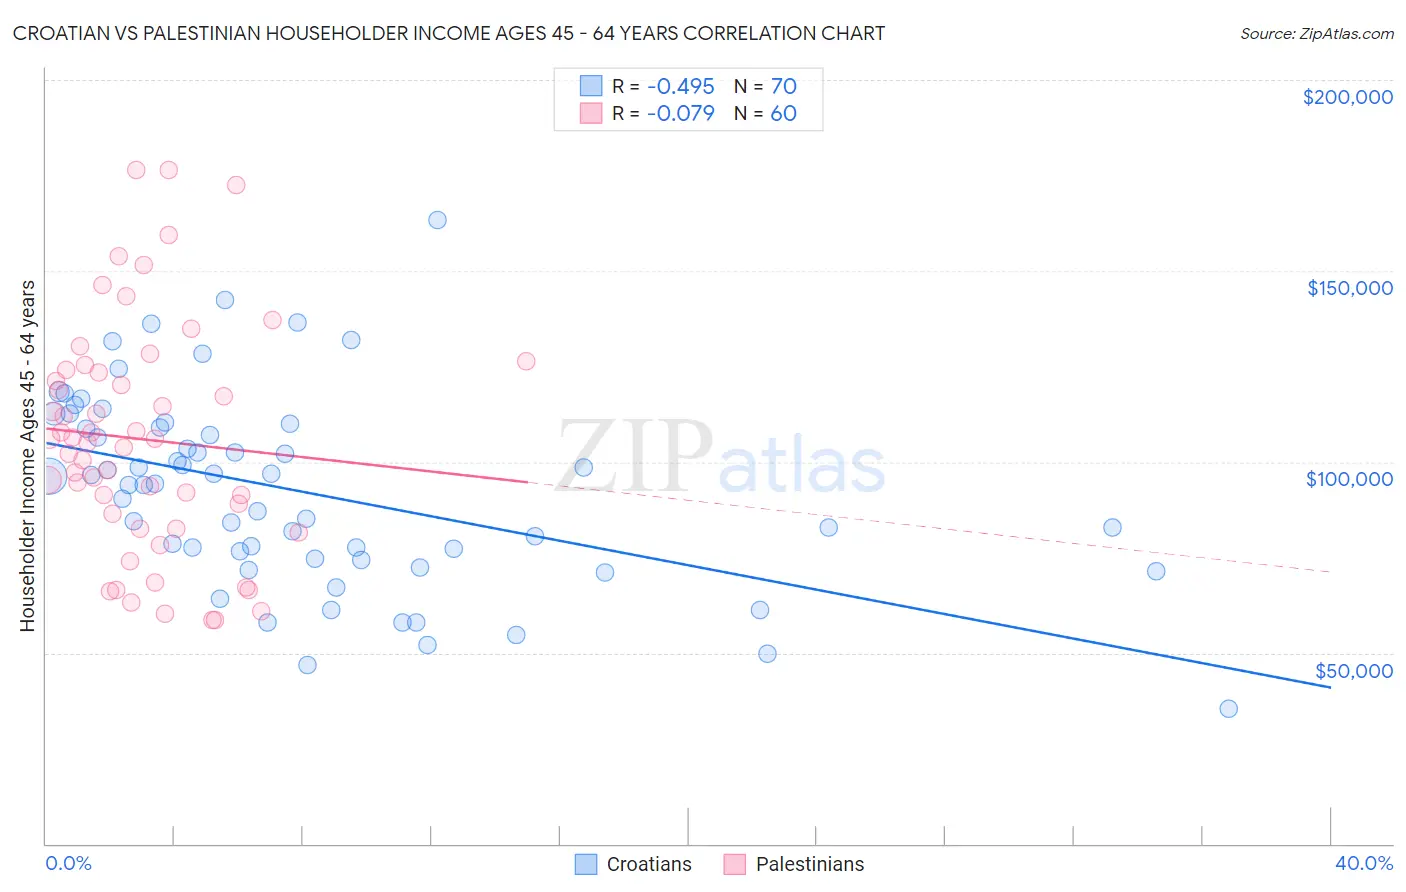 Croatian vs Palestinian Householder Income Ages 45 - 64 years